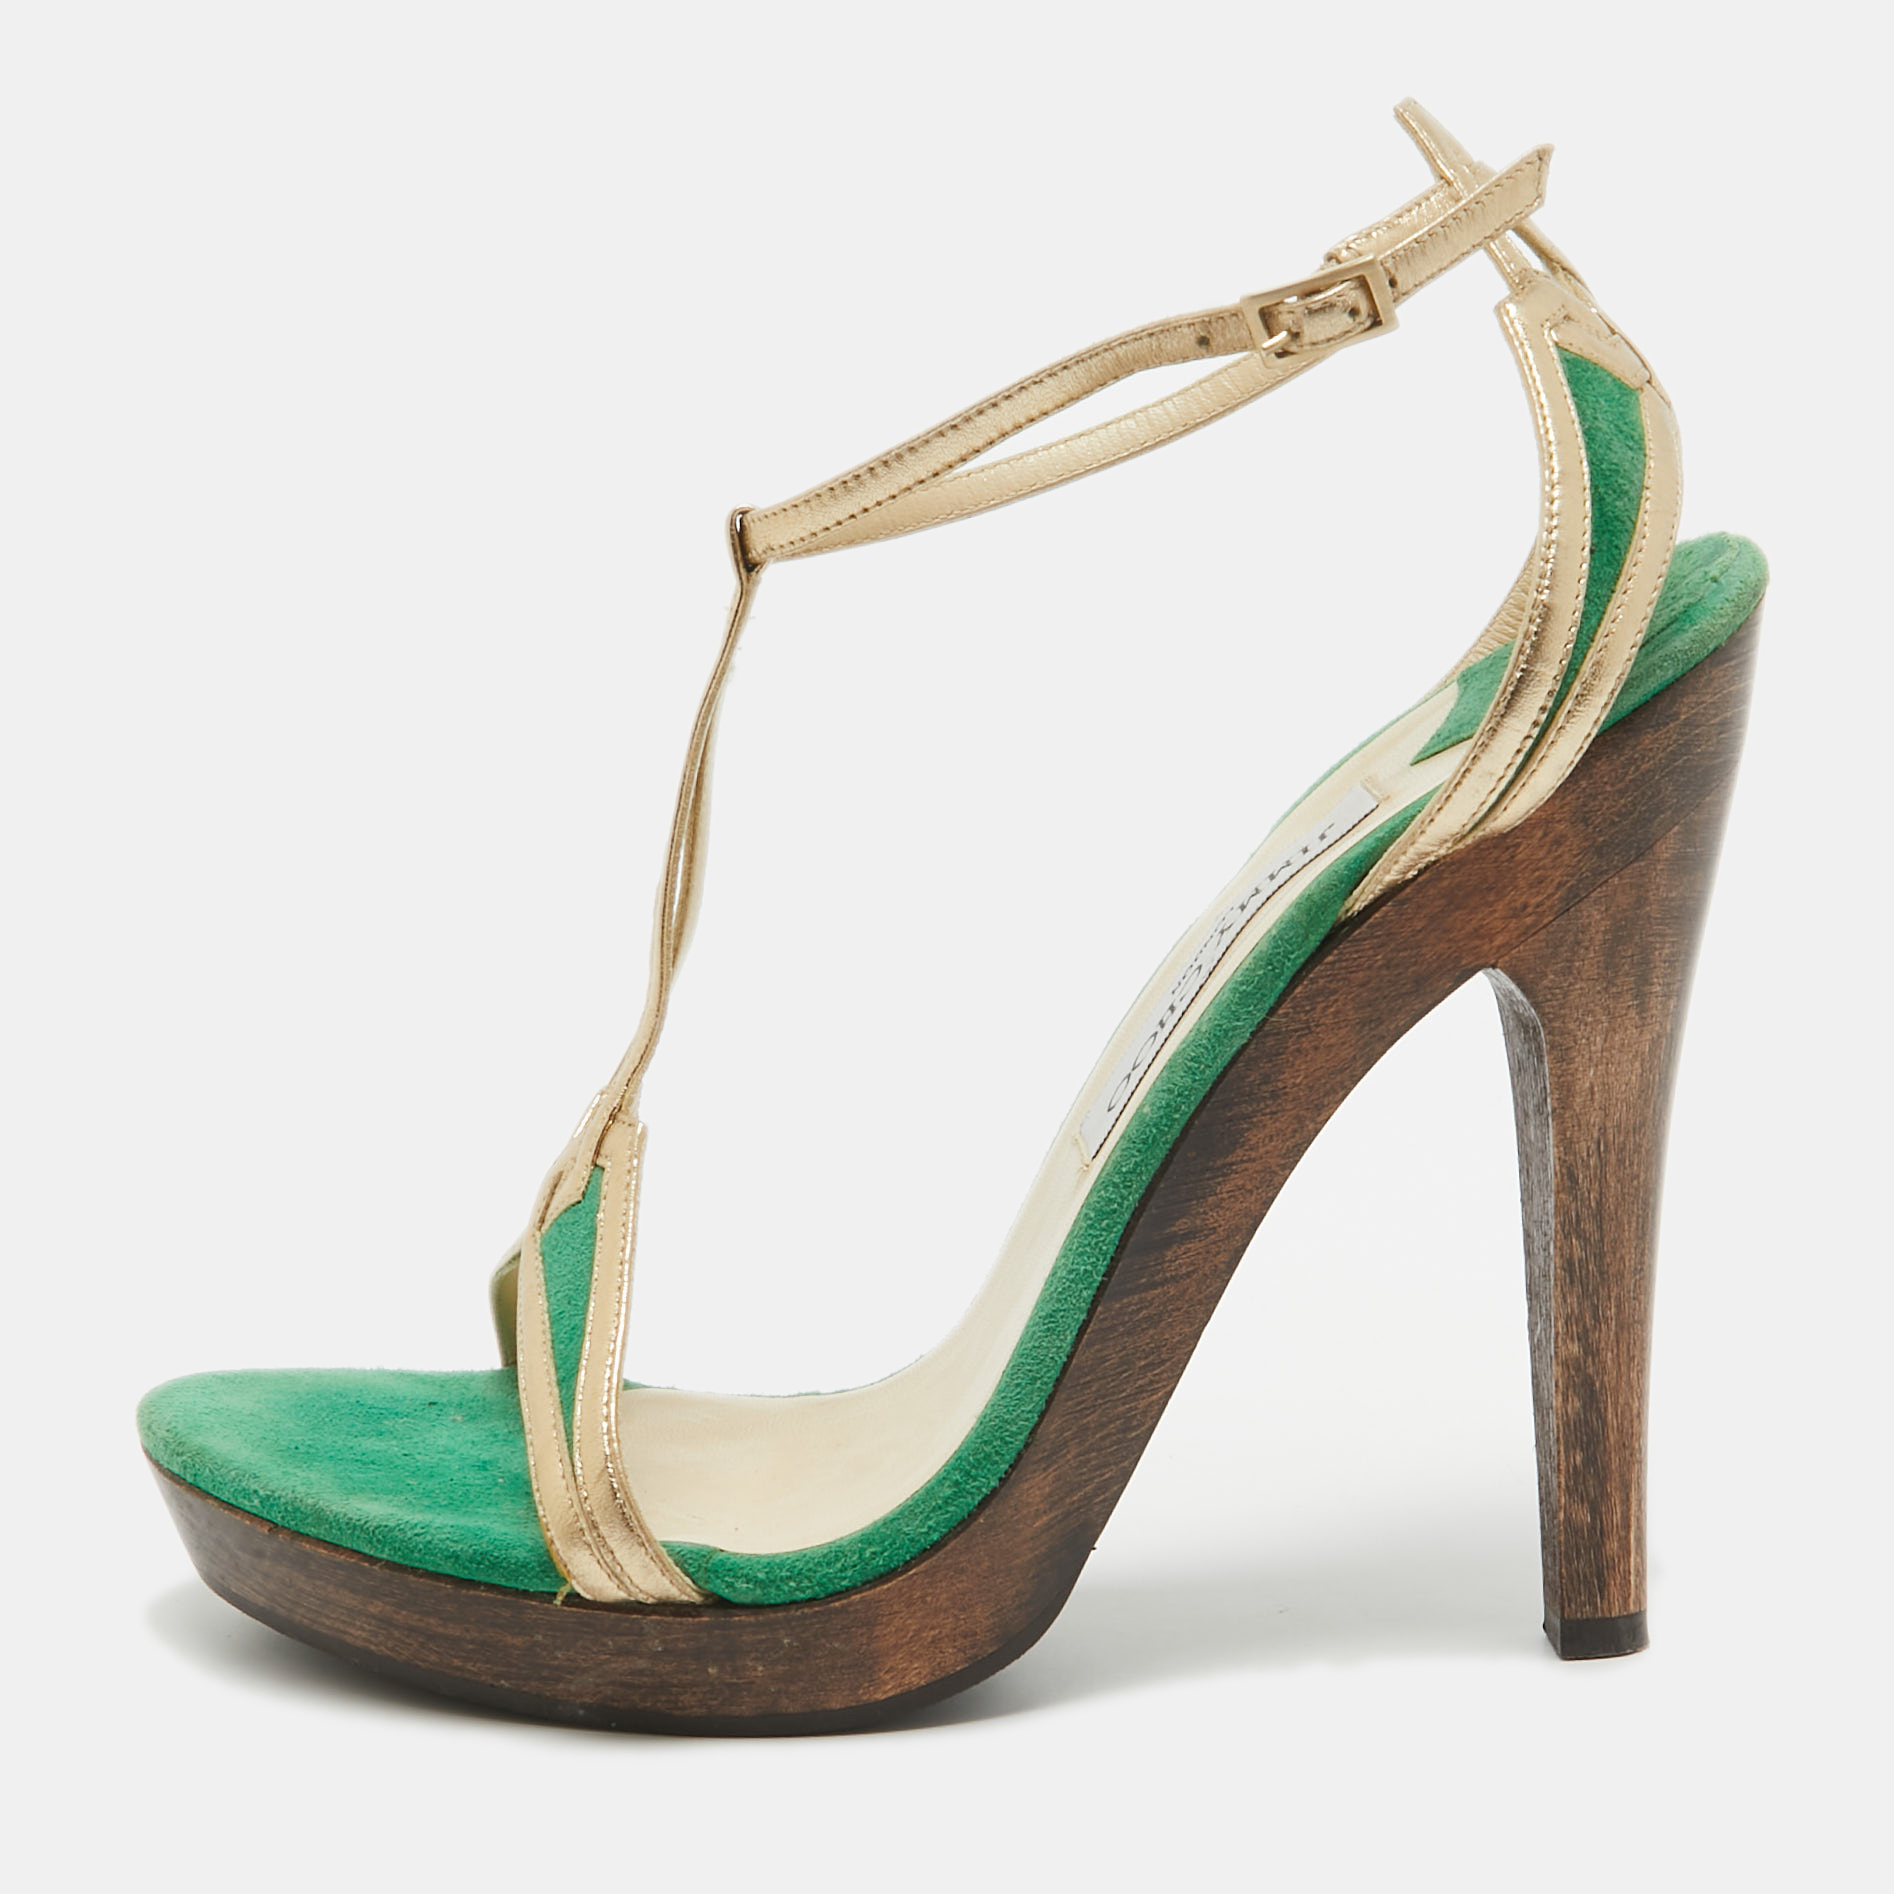 Jimmy choo green/gold suede and leather t-bar ankle strap sandals size 39